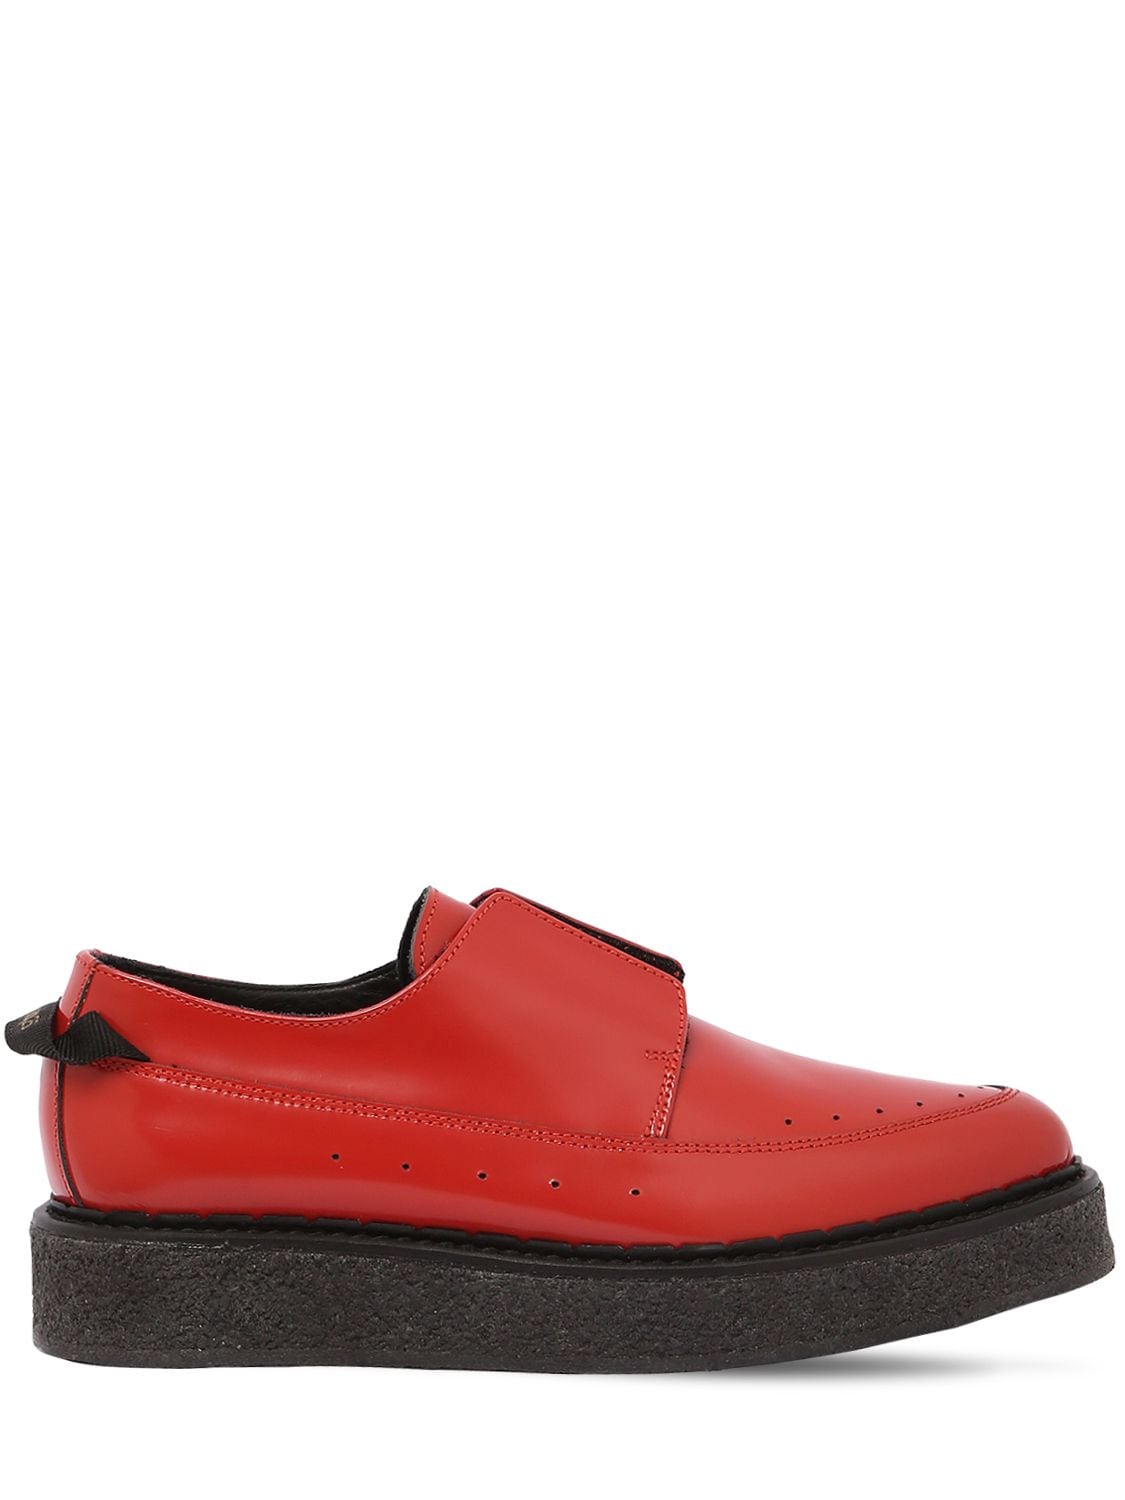 Faqtory Polished Leather Laceless Derby Shoes In Red | ModeSens